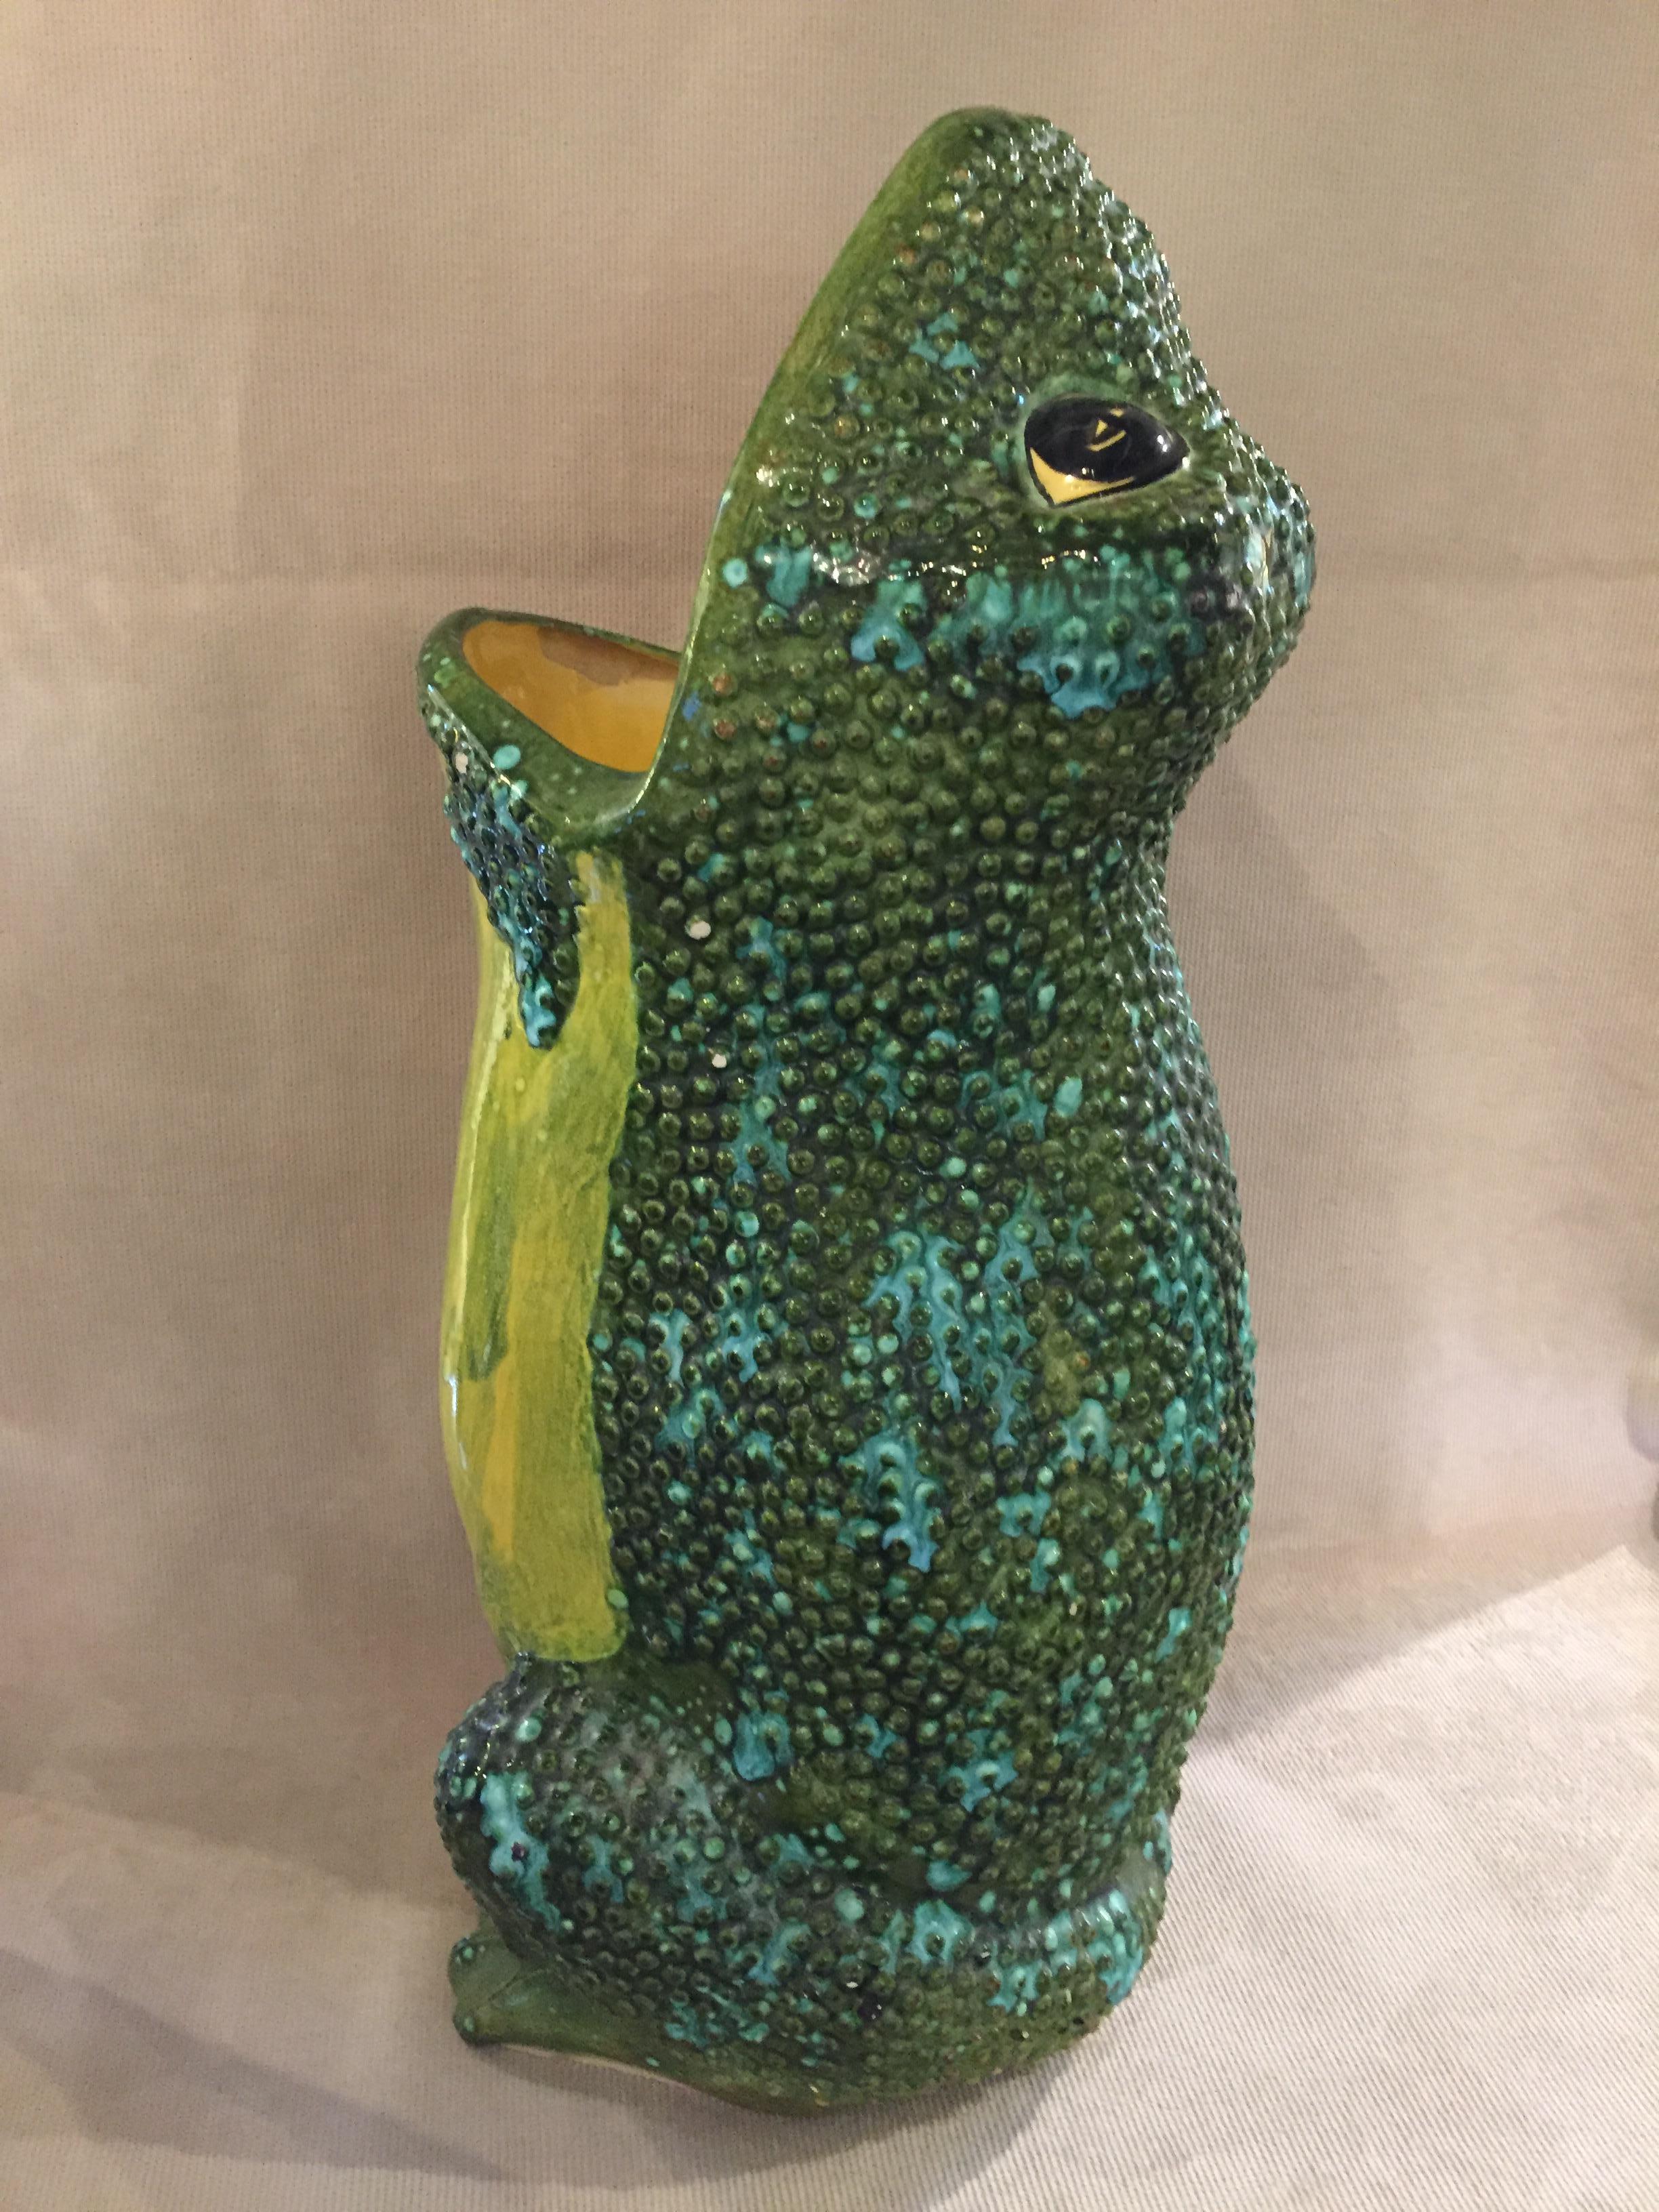 Large ceramic frog umbrella stand, hand glazed with green yellow Turquoise, stamped Spectrom on side. These where sometimes sold by Gumps Co., this has the old felt covering the bottom.